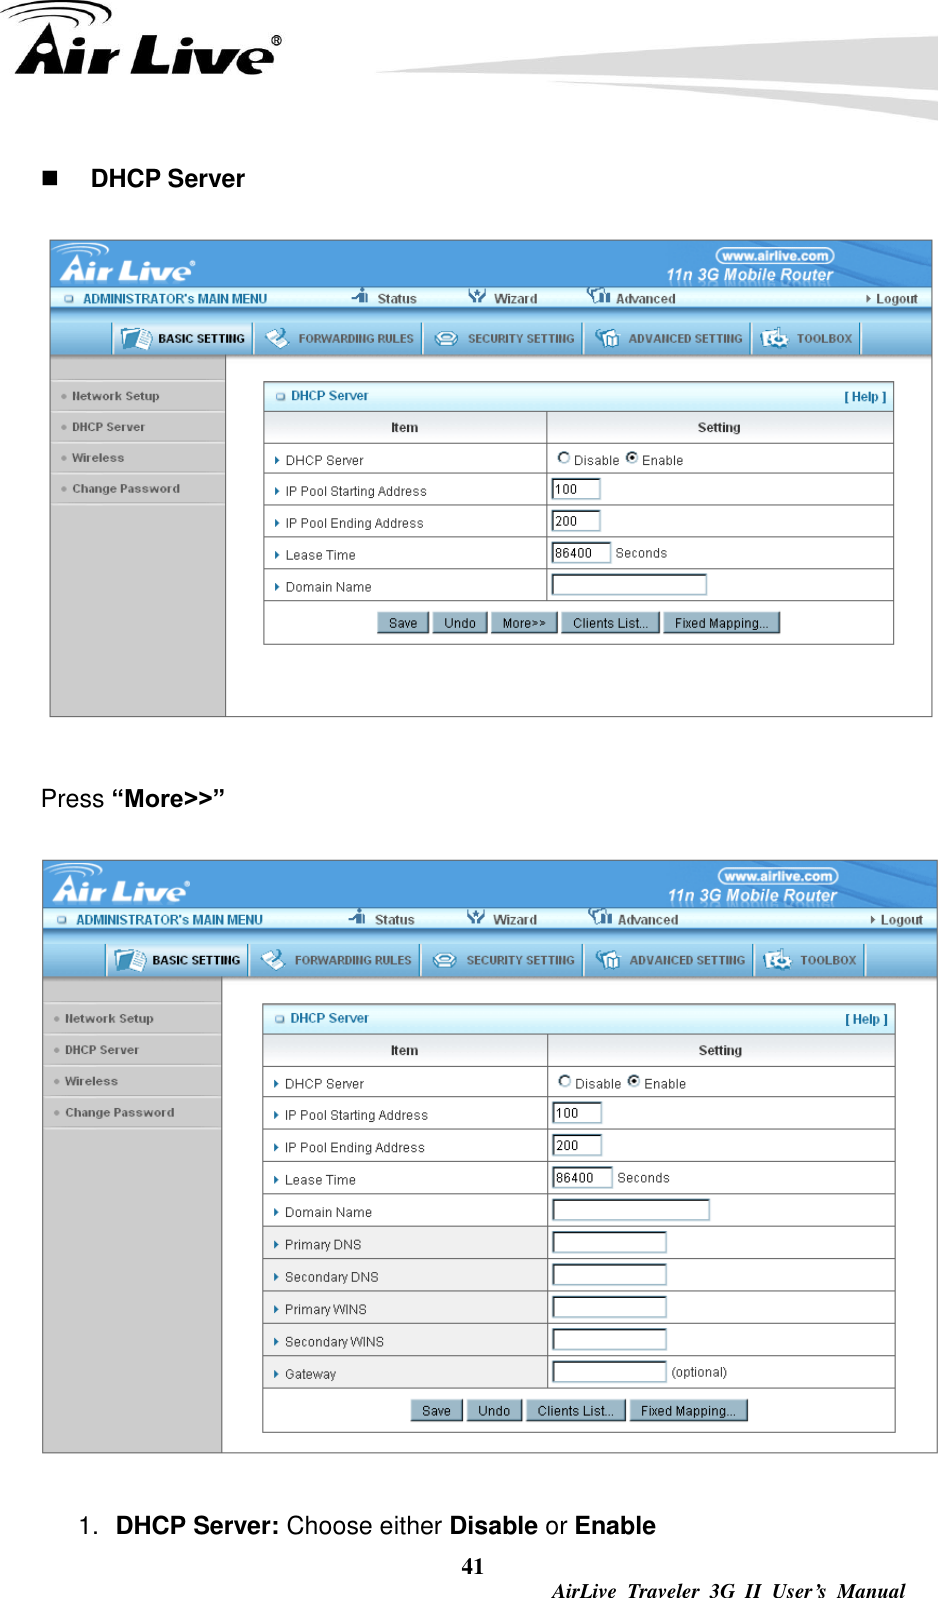  41  AirLive  Traveler  3G  II  User’s  Manual  DHCP Server    Press “More&gt;&gt;”  1. DHCP Server: Choose either Disable or Enable 